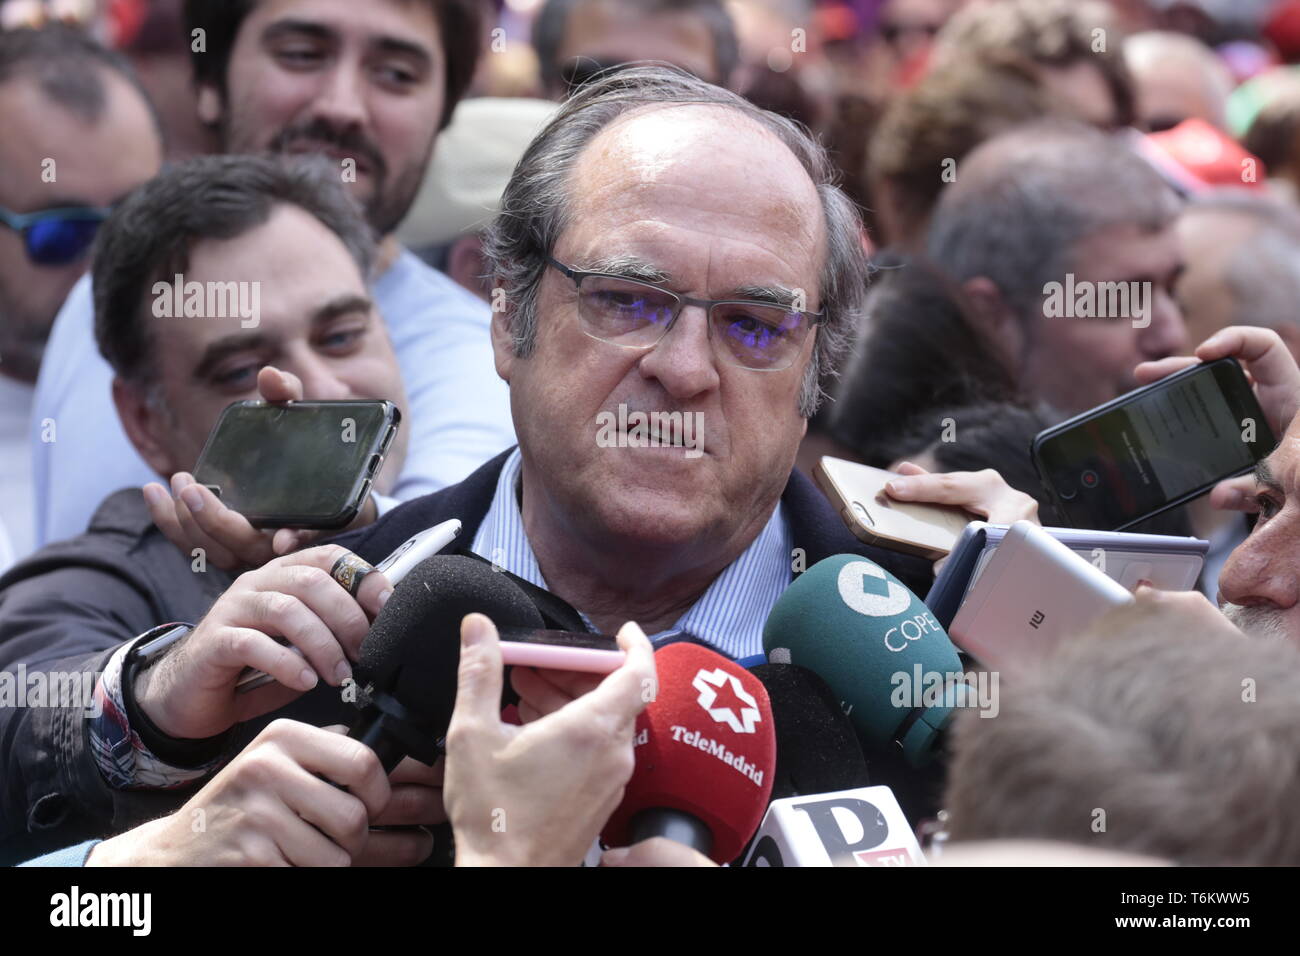 Ángel Gabilondo, candidate for the presidency of the Madrid region seen speaking to the media during the protest. Thousands of protesters demonstrate on the International Workers' Day convoked by the majority unions UGT and CCOO to demand policies and reductions in unemployment levels in Spain, against job insecurity and labour rights. Politicians of the PSOE and Podemos have participated in the demonstration. Stock Photo